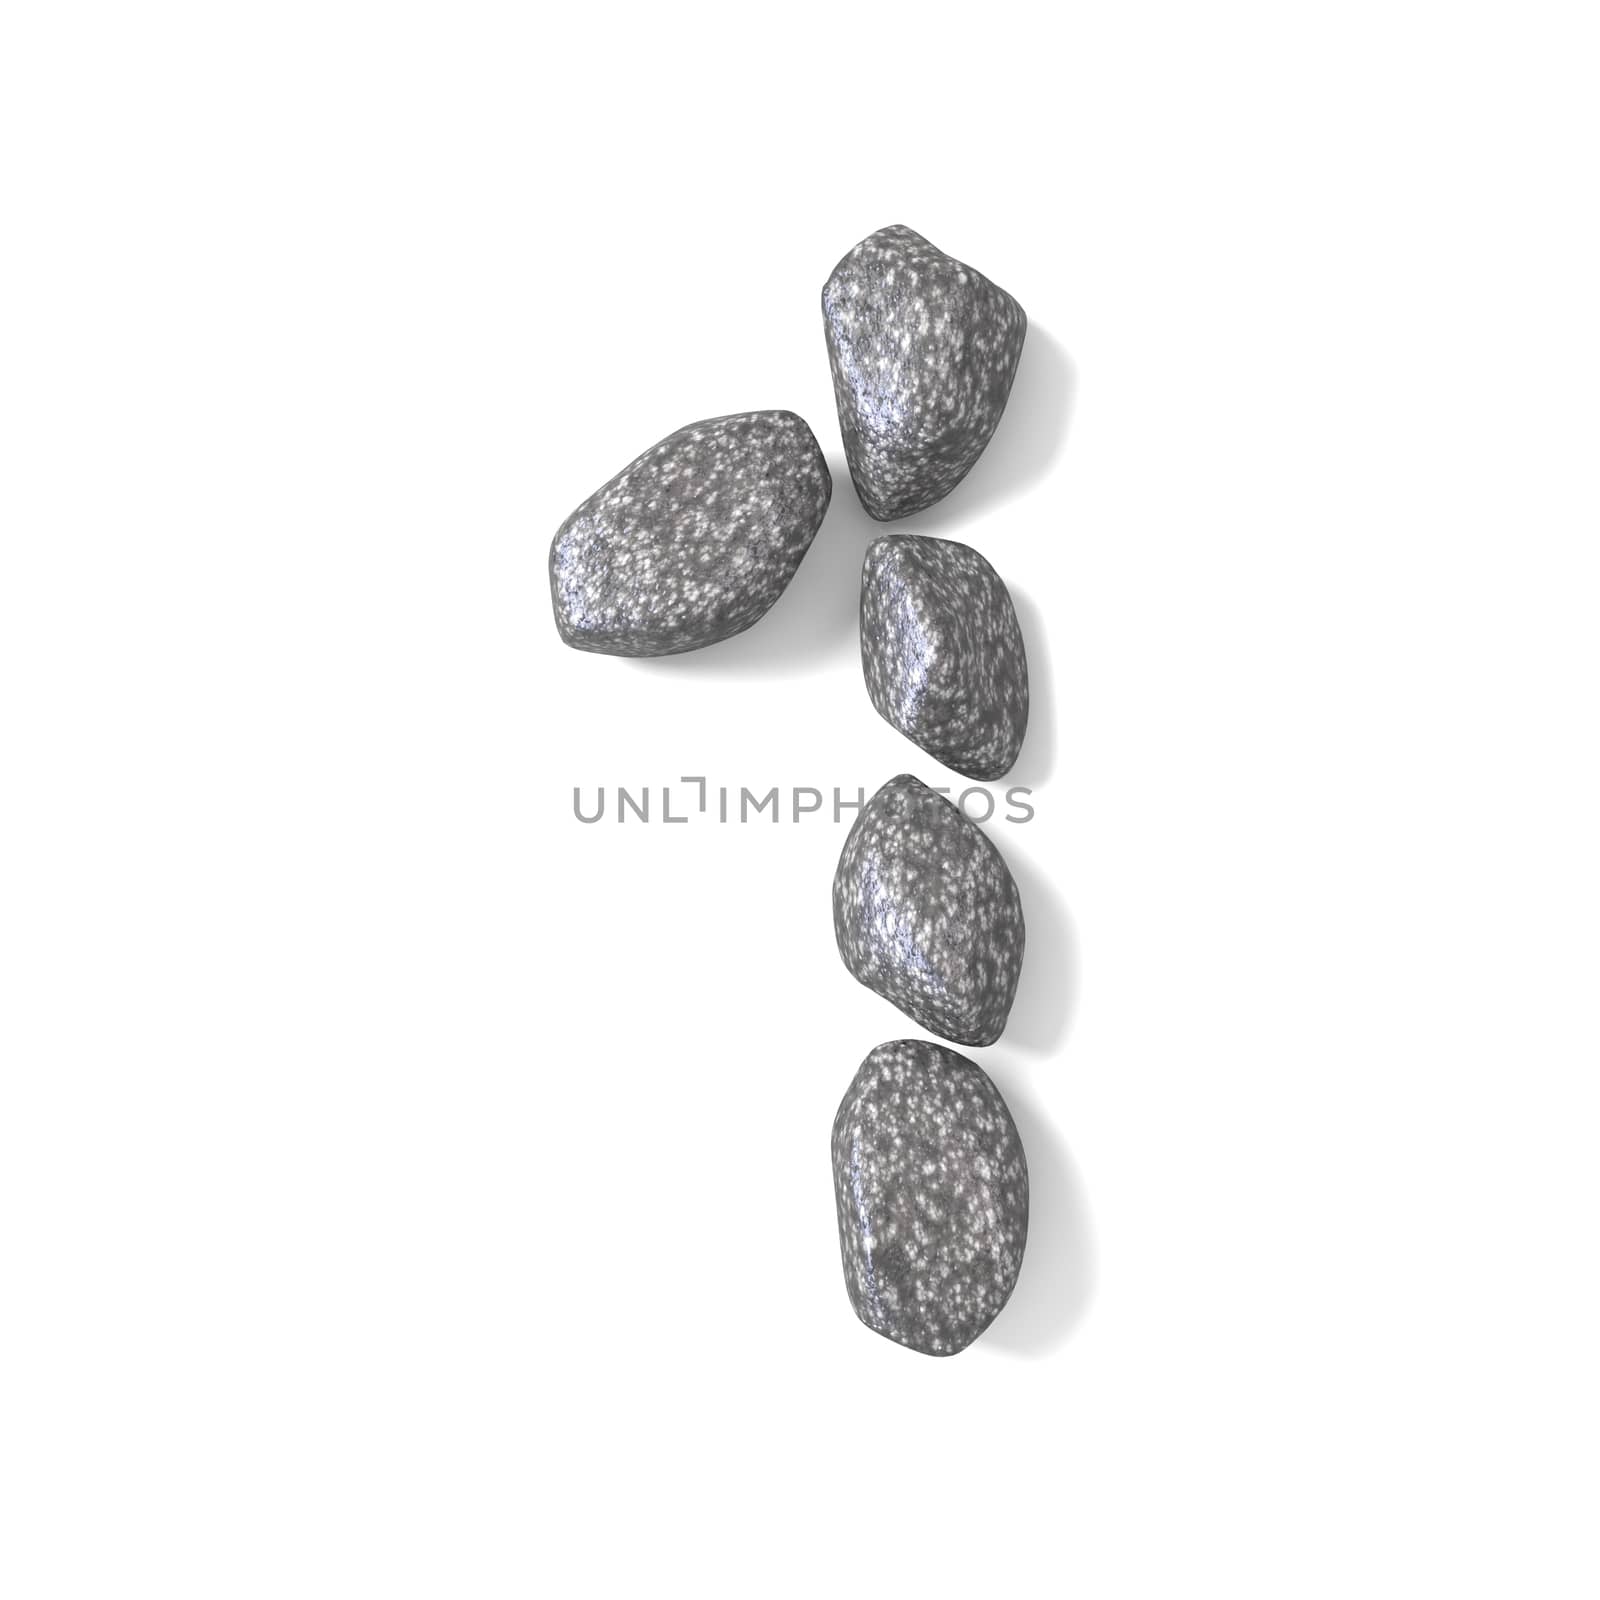 Font made of rocks NUMBER one 1 3D render illustration isolated on white background